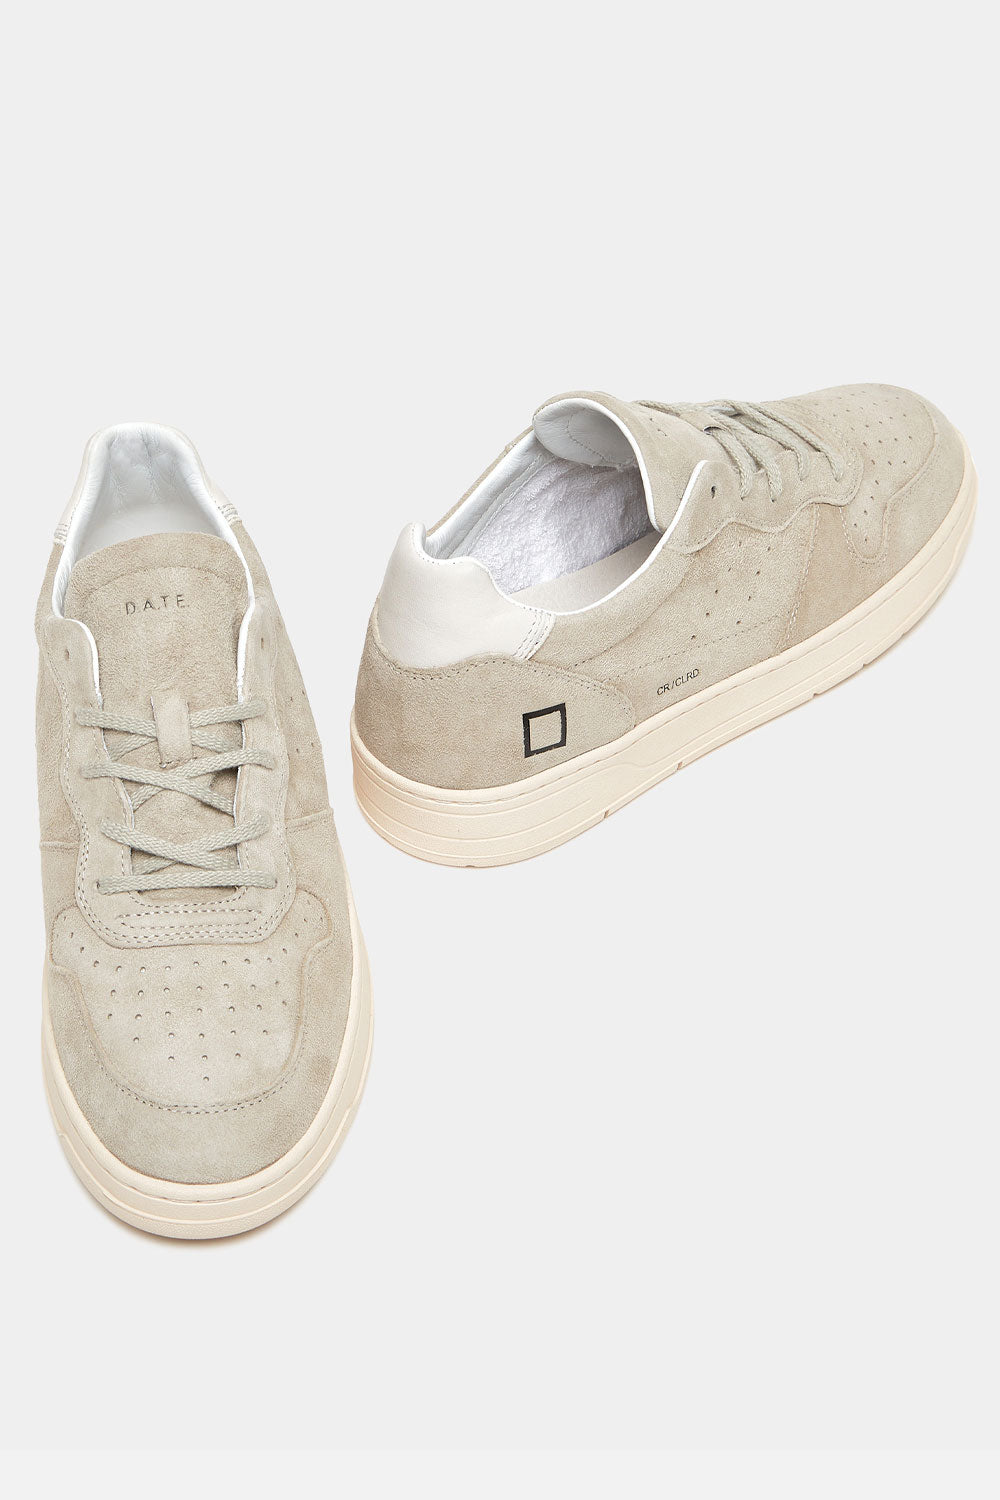 Buy the D.A.T.E. Court 2.0 Colored Sneaker in Beige at Intro. Spend £50 for free UK delivery. Official stockists. We ship worldwide.